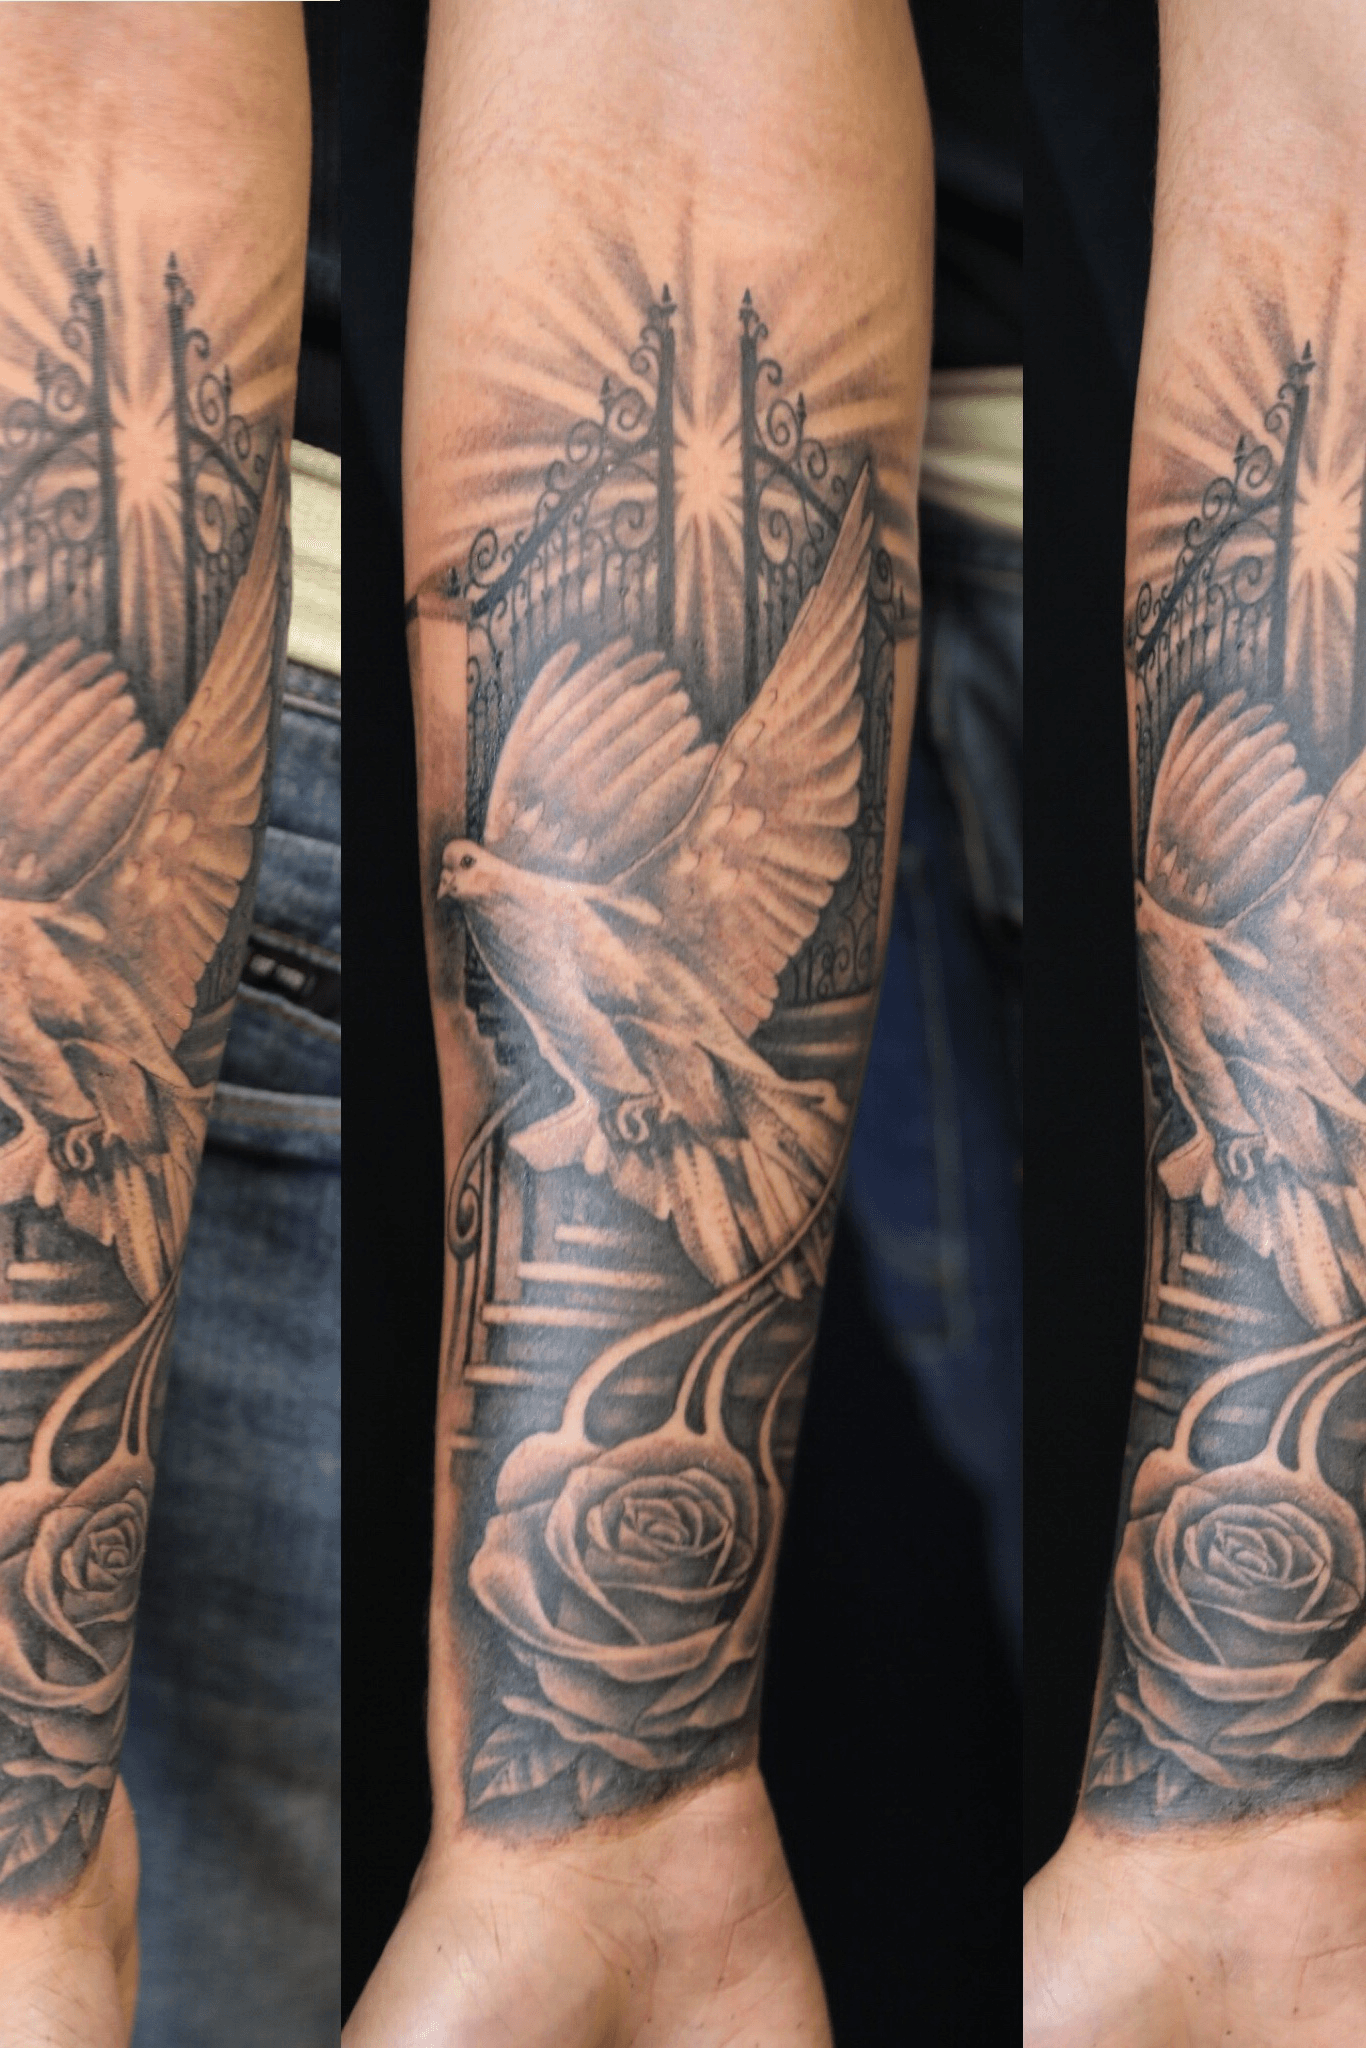 Details more than 76 gates to heaven tattoo